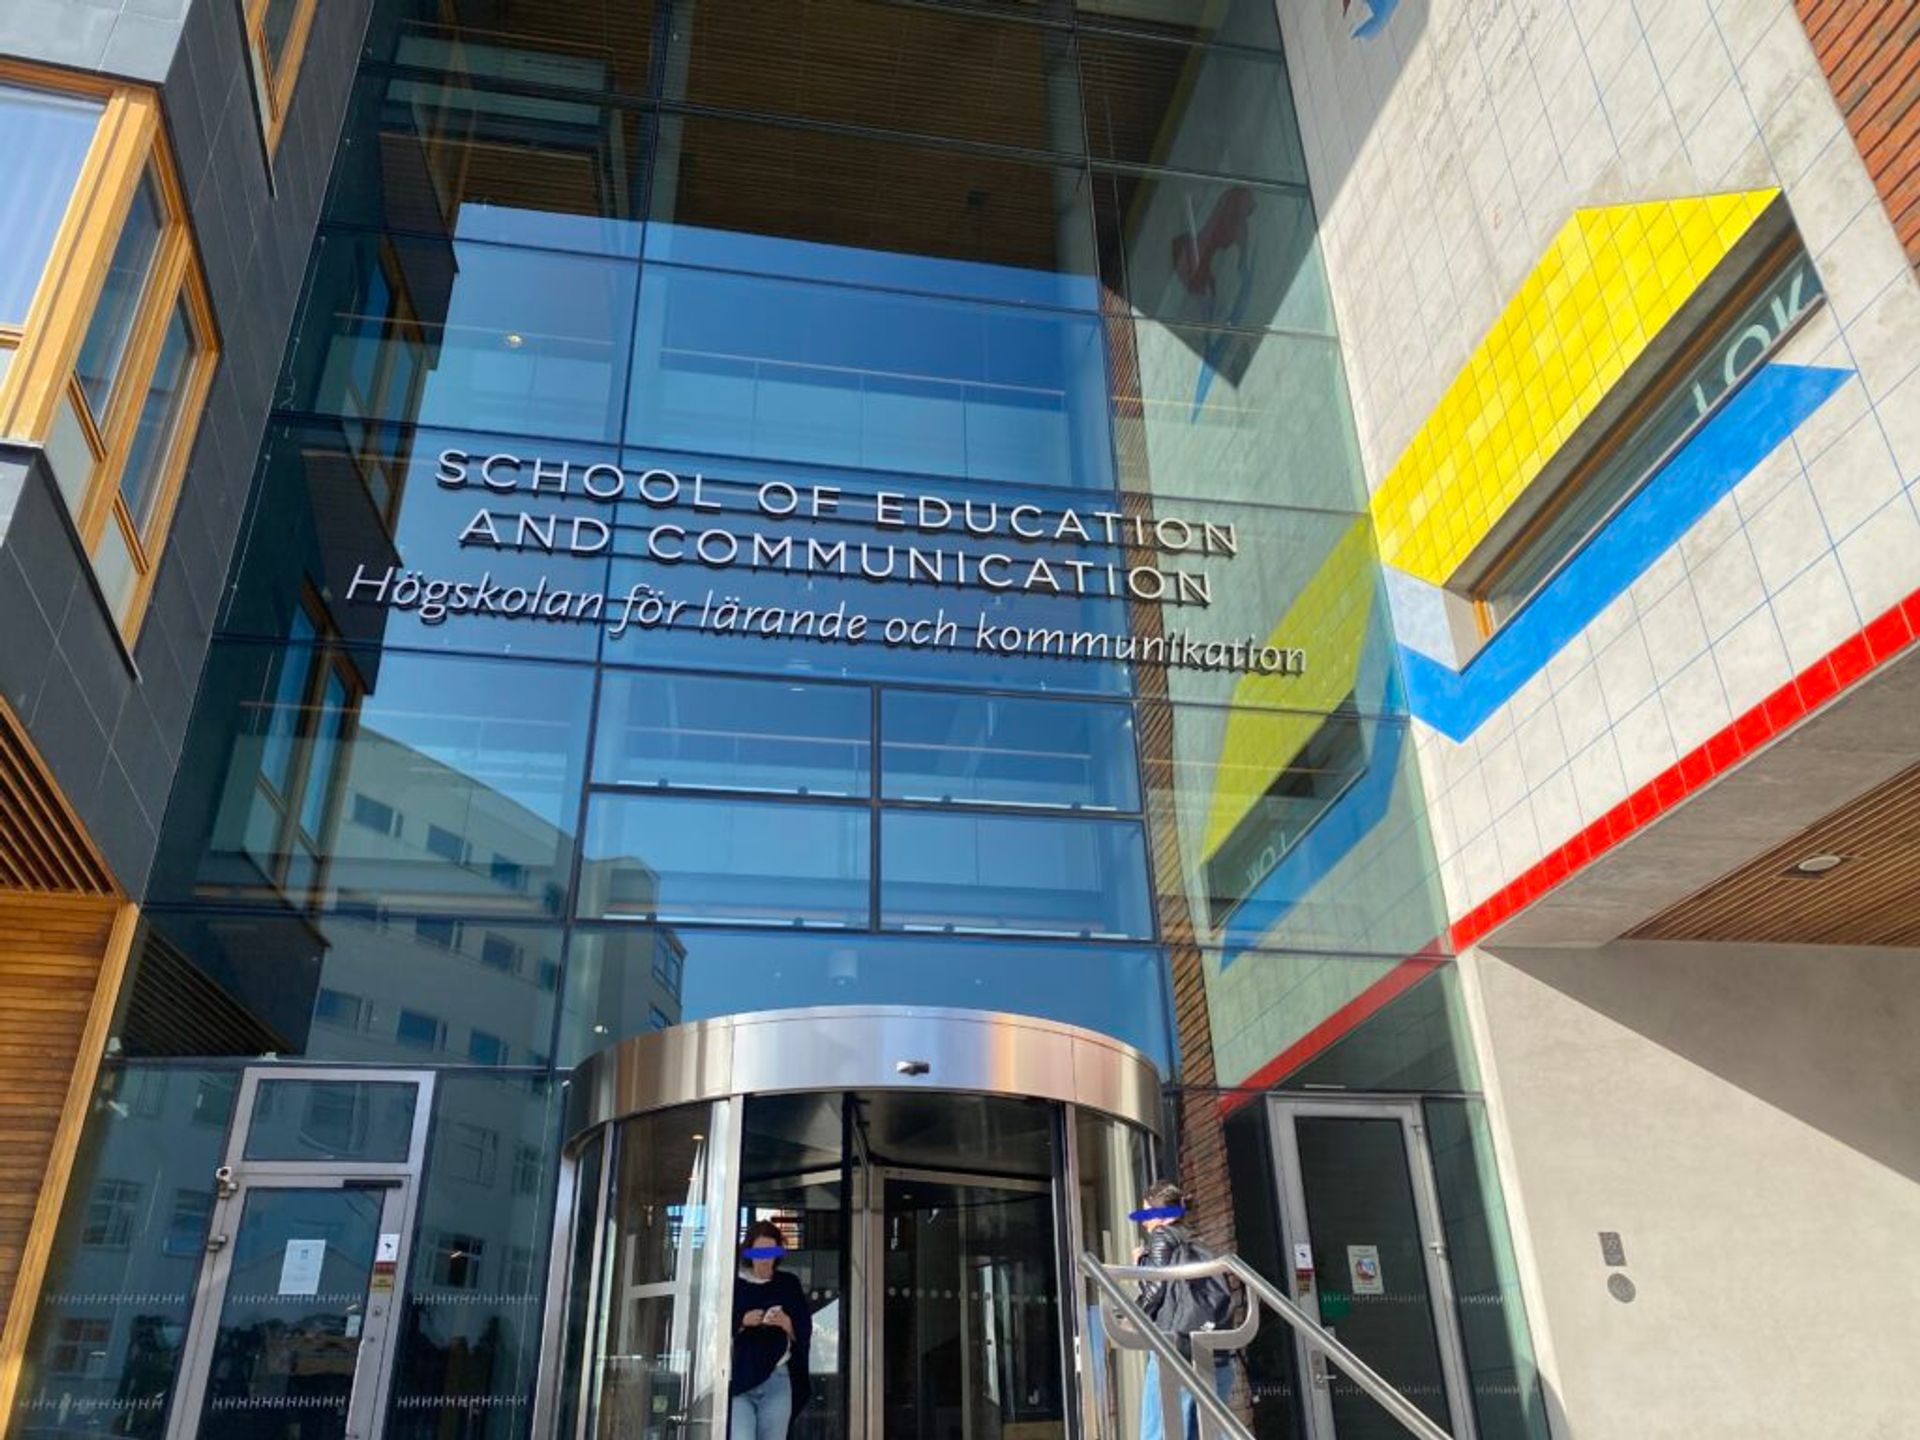 The entrance to the School of Education and Communication building at Jönköping University.